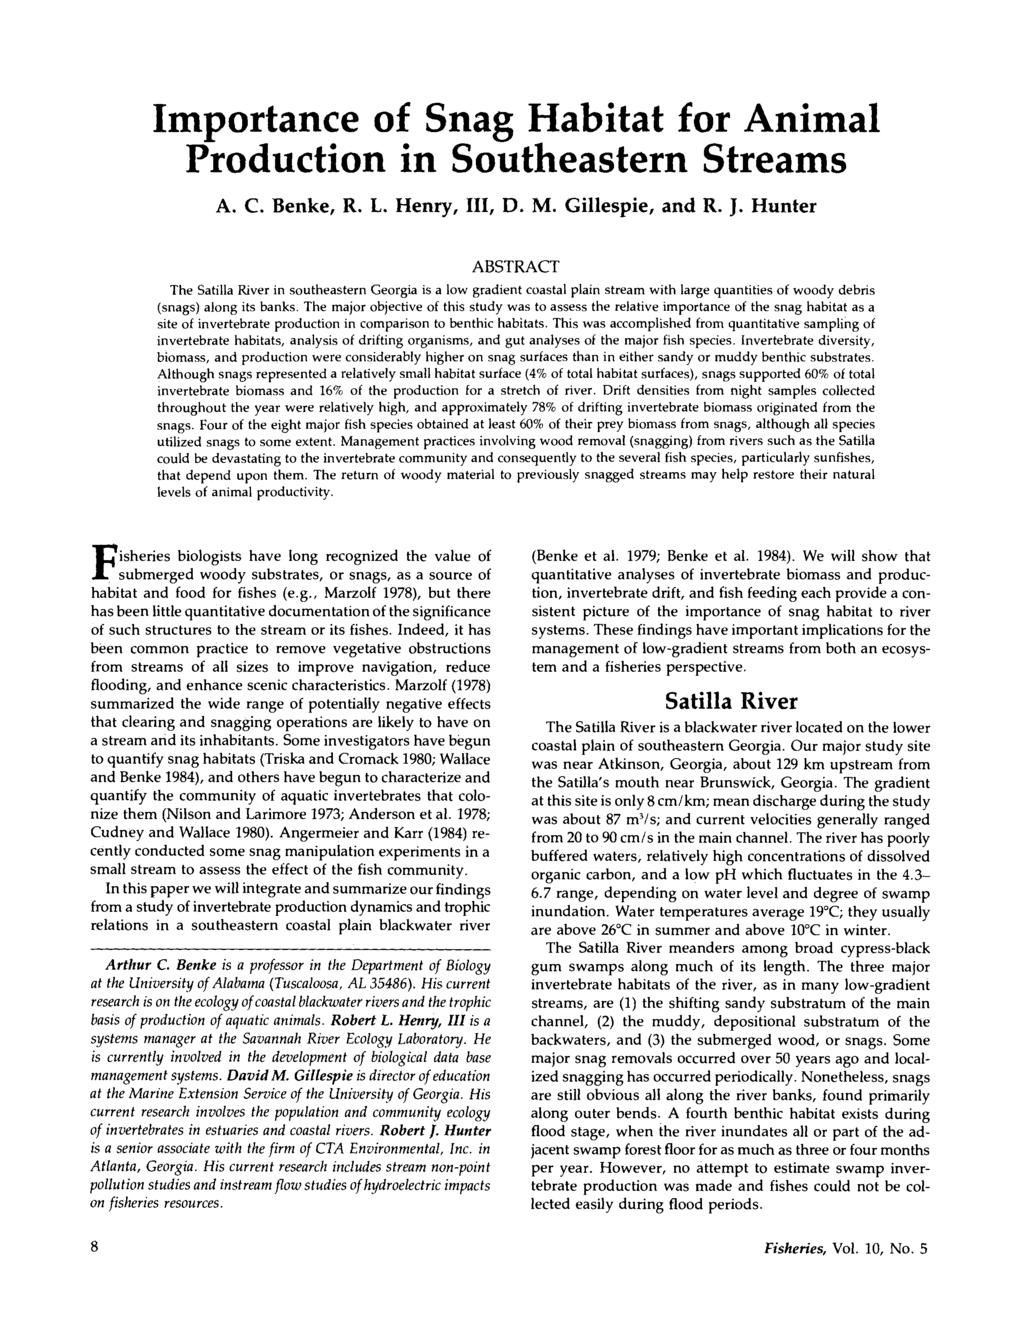 mportance of Snag Habitat for Animal Production in Southeastern Streams A. C. Benke, R. L. Henry,, D. M. Gillespie, and R. J.